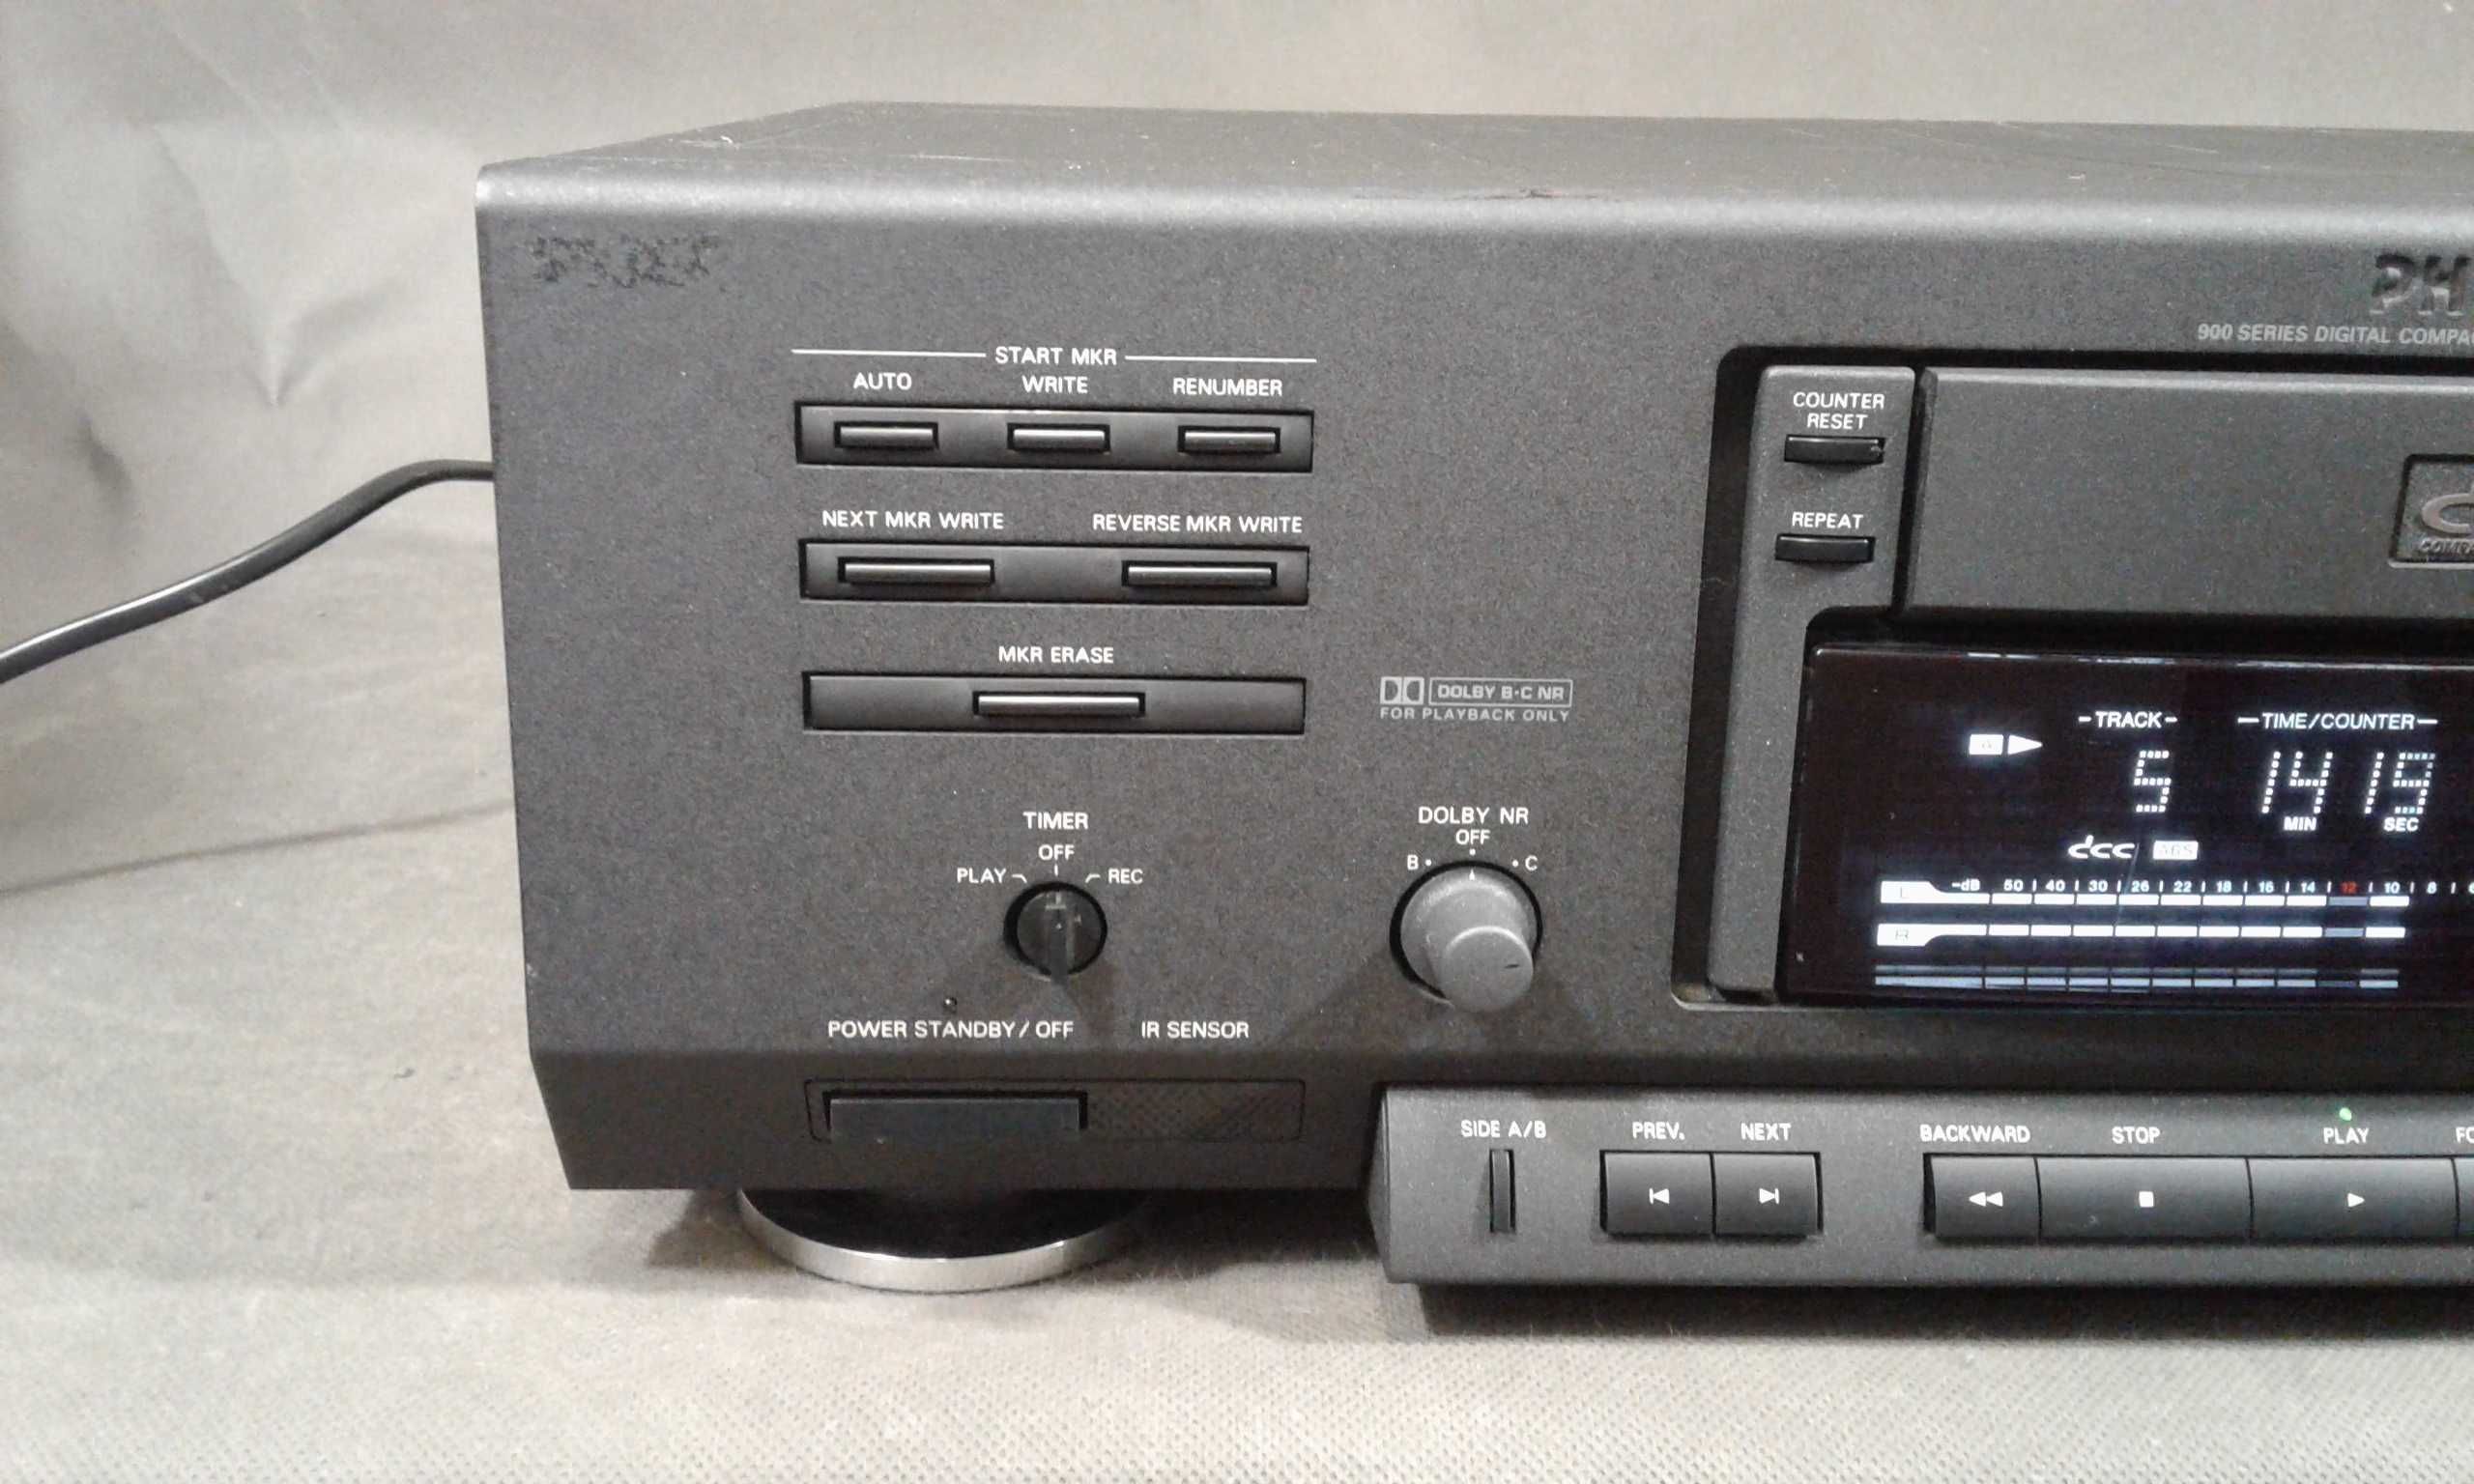 PHILIPS DCC-900,magnetofon cyfrowy